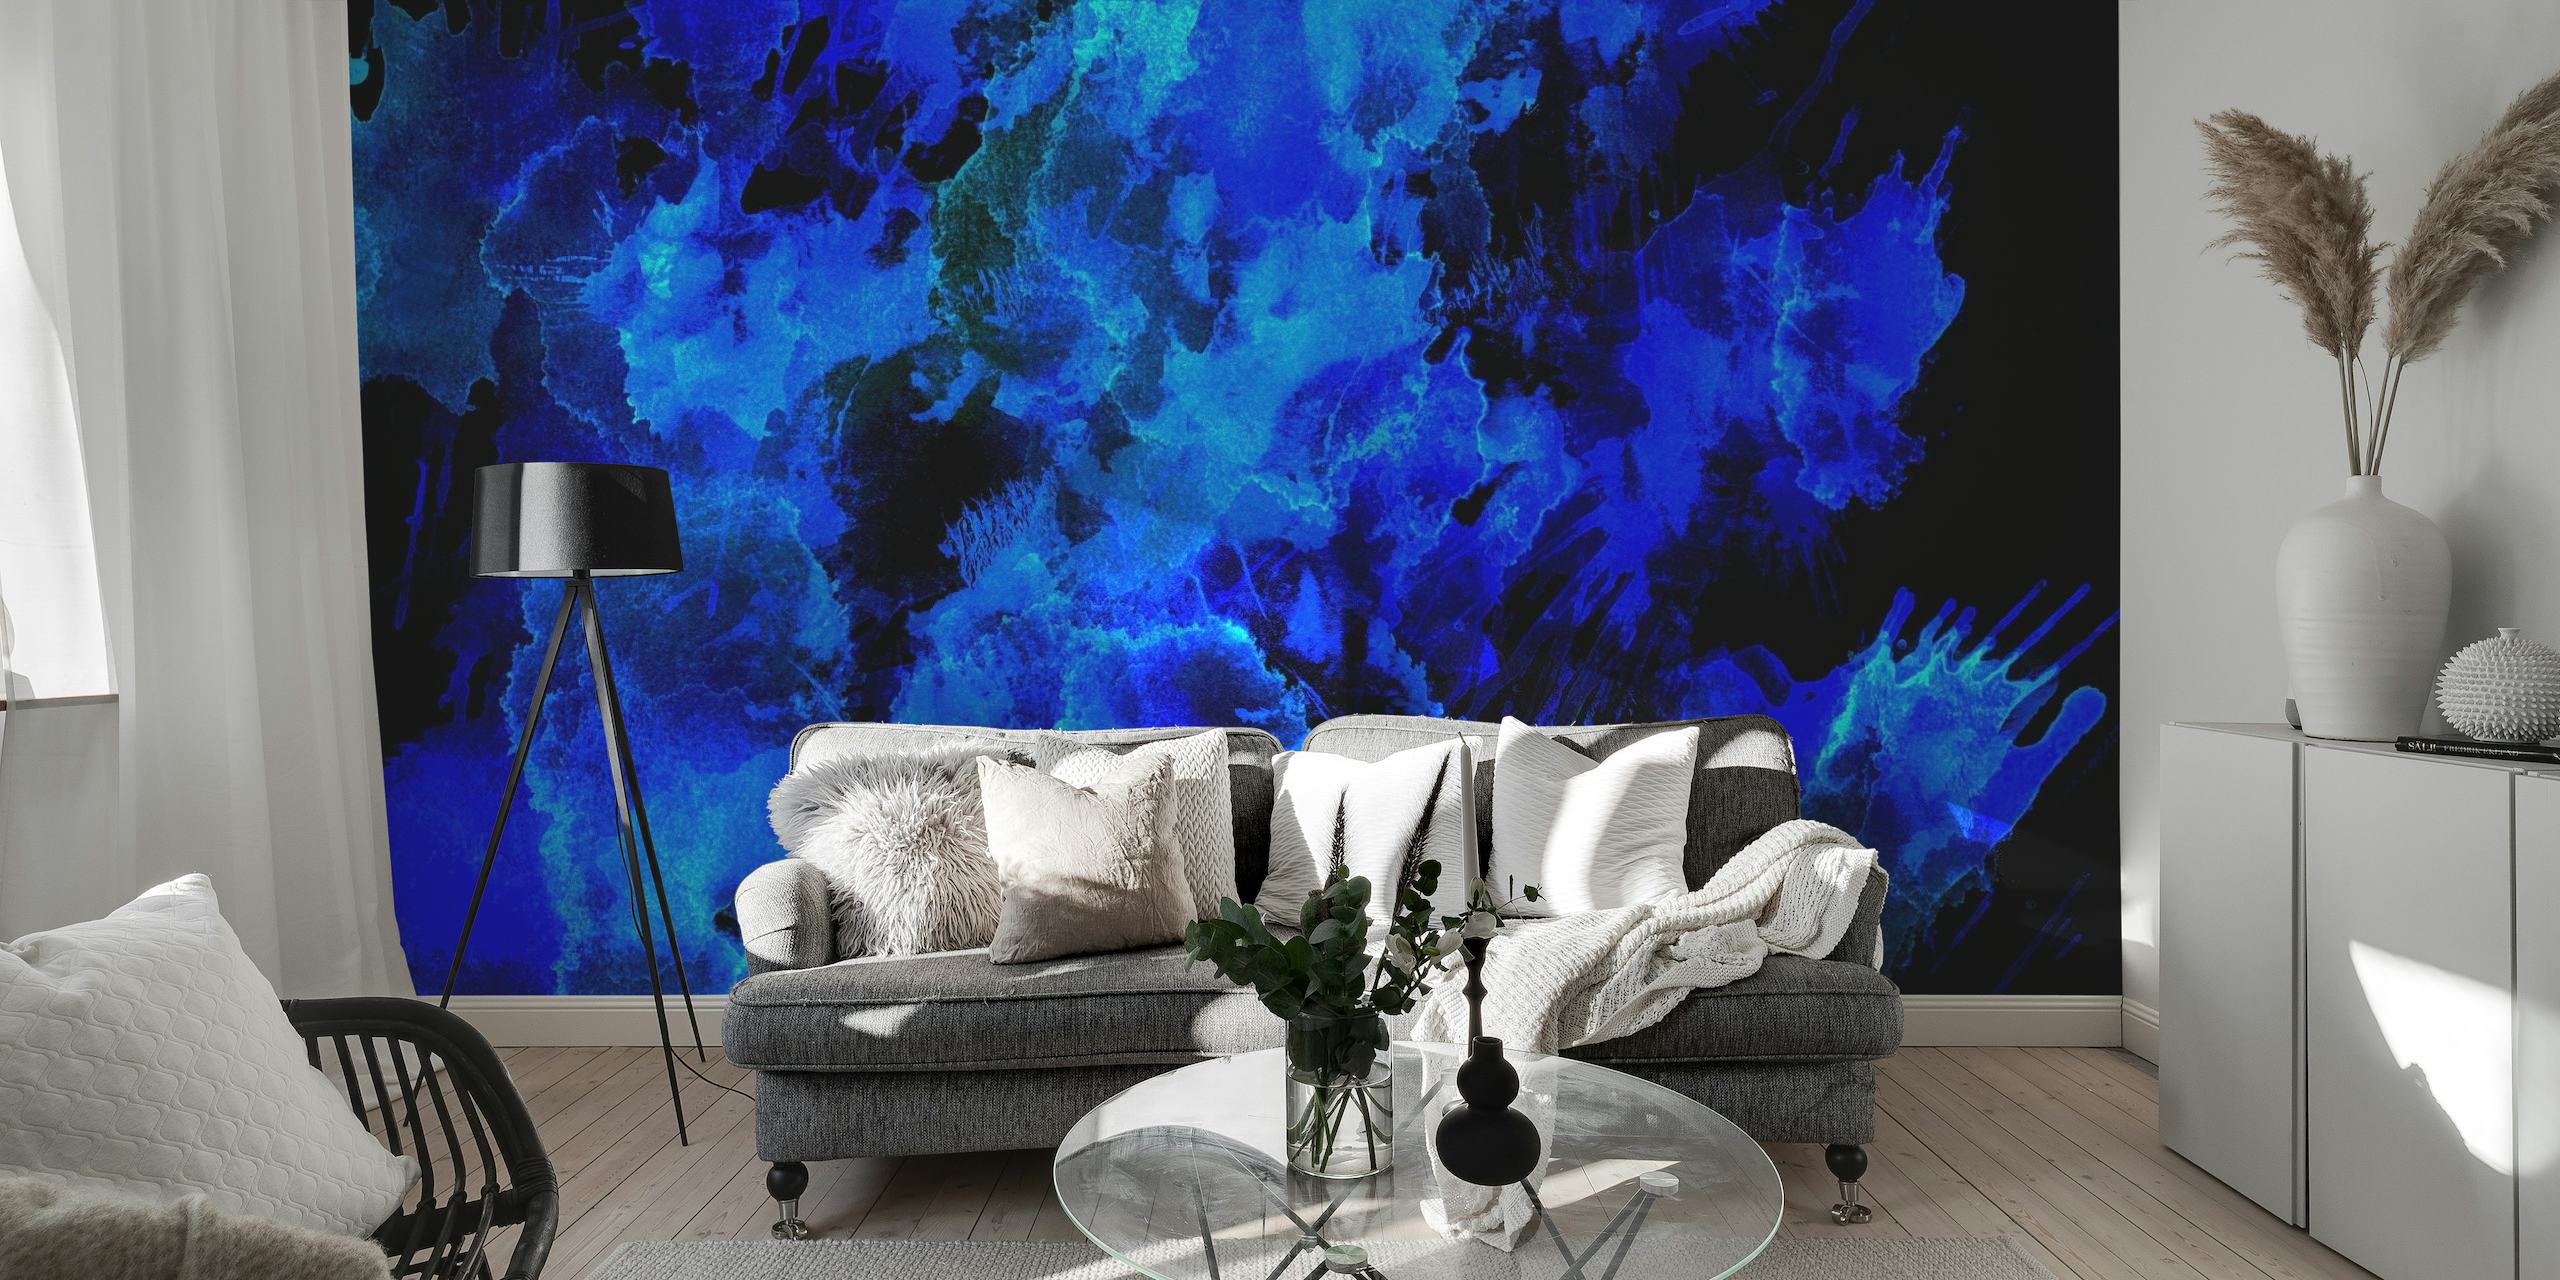 Abstract blue shades mural invoking the beauty of the night sky or ocean depths